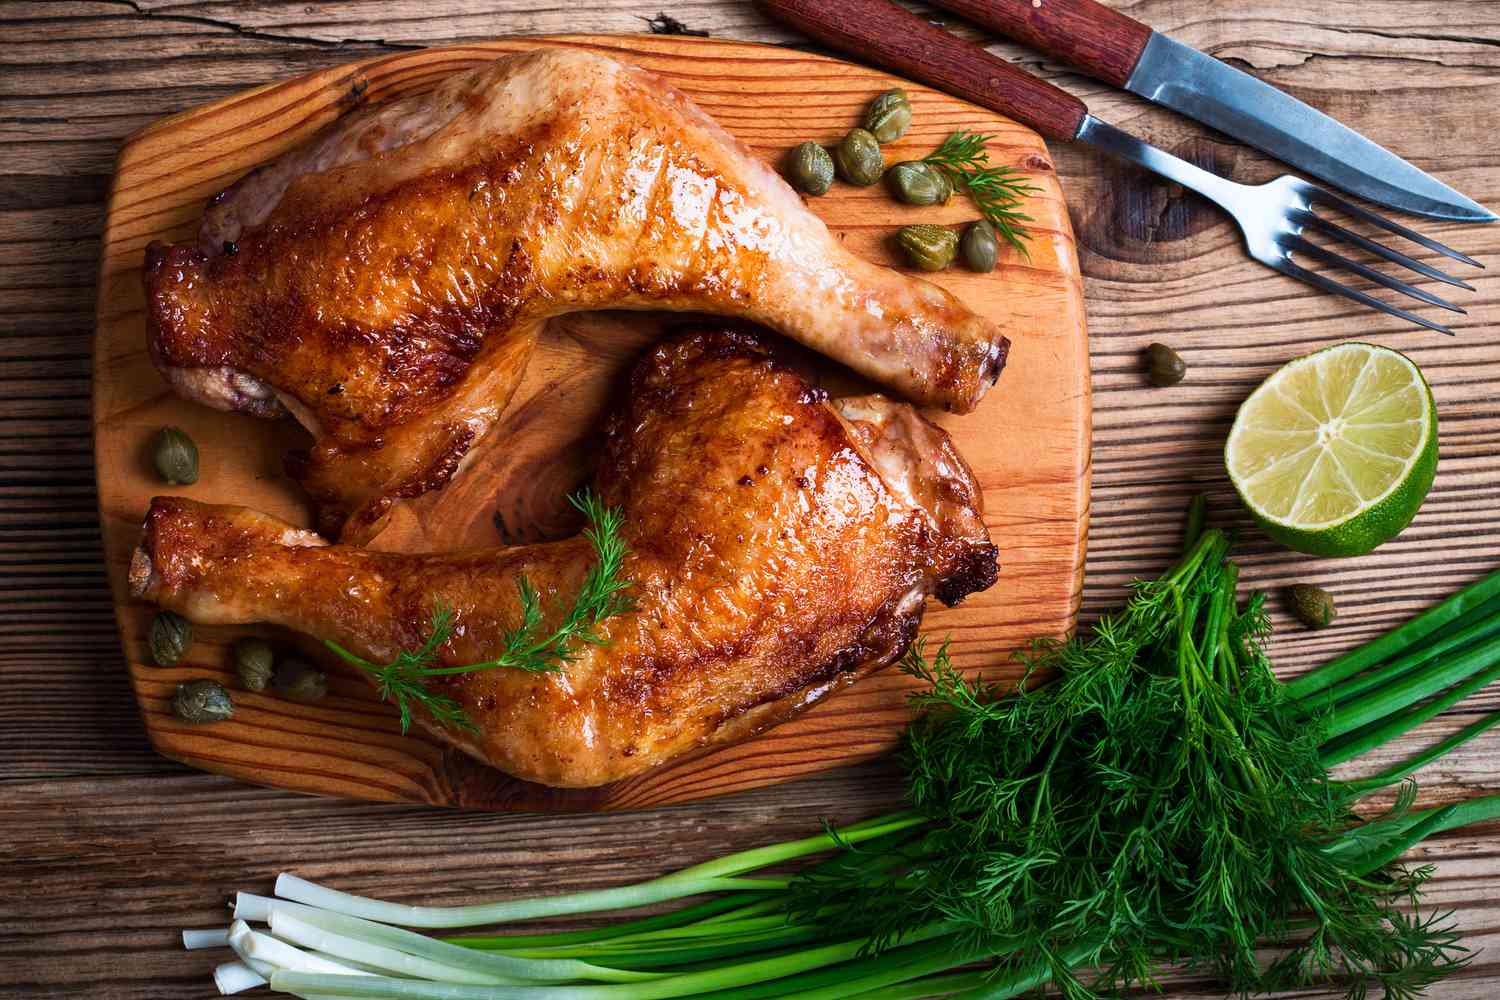 Poultry Preferences: White Meat Chicken